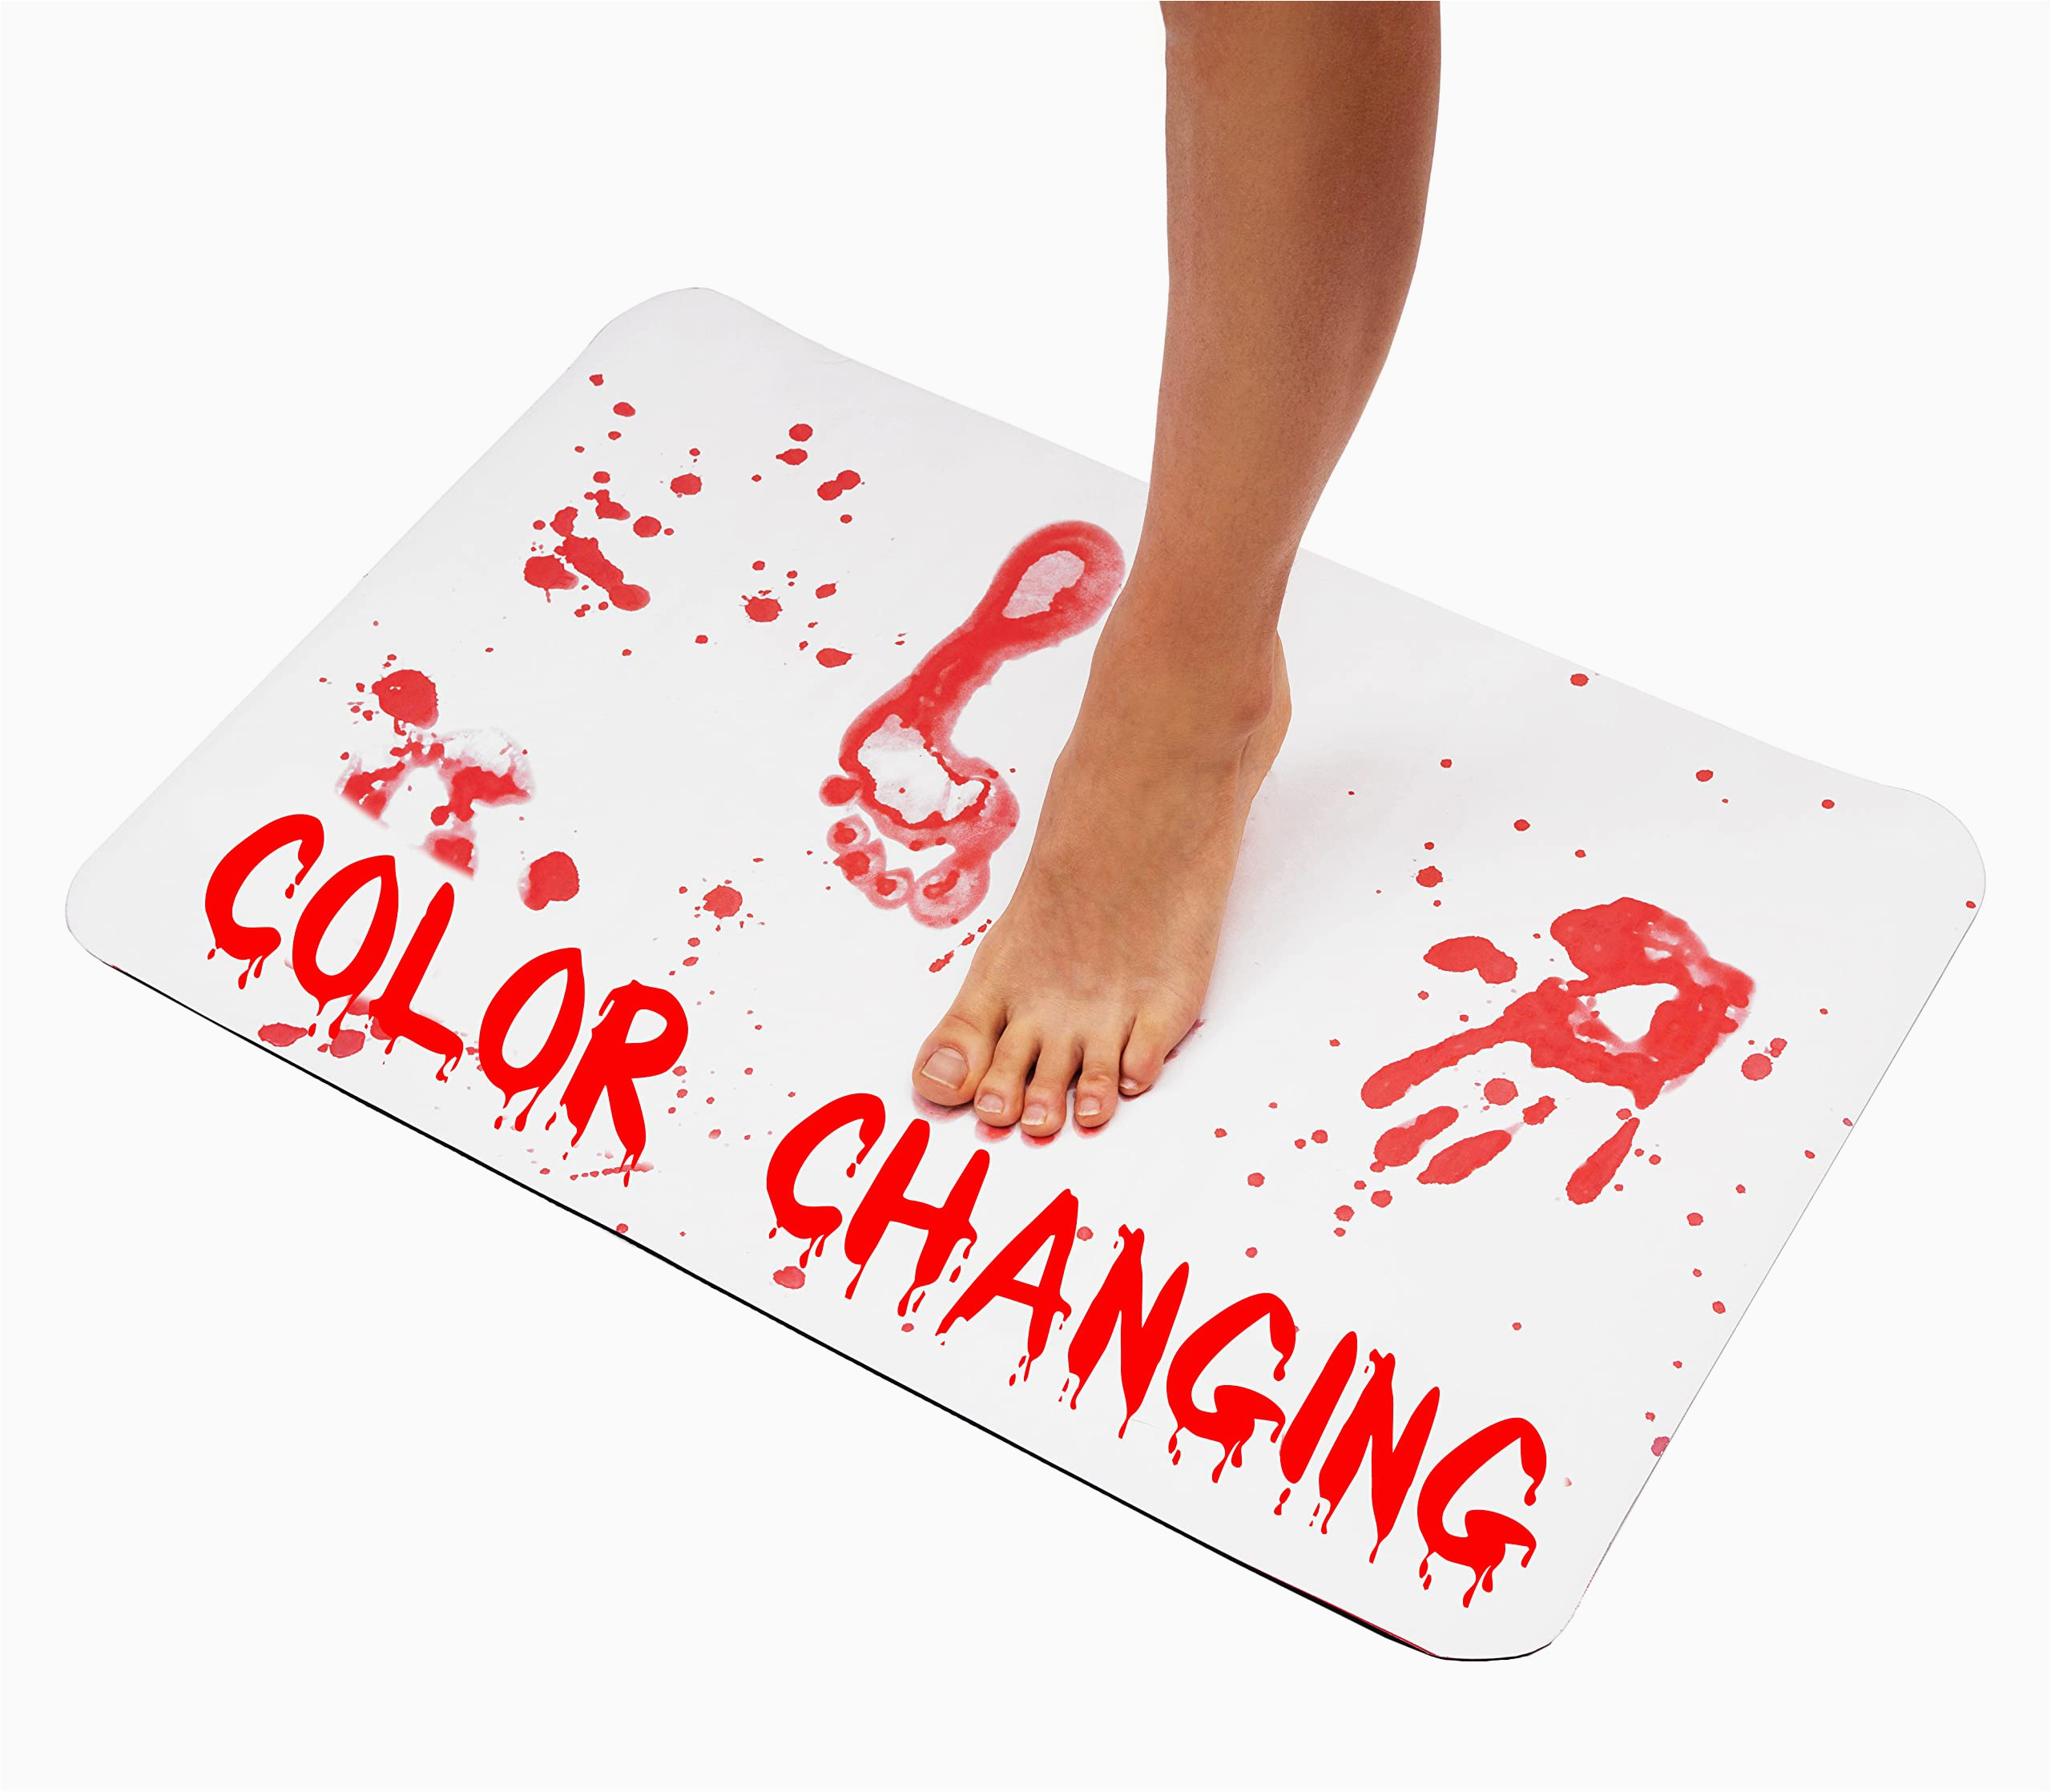 Bath Rug that Turns Red when Wet the Murder Mat Bath Mat Changes Color Instantly Turns Red when Wet Shower Mat Shows Blood Bathroom Rug